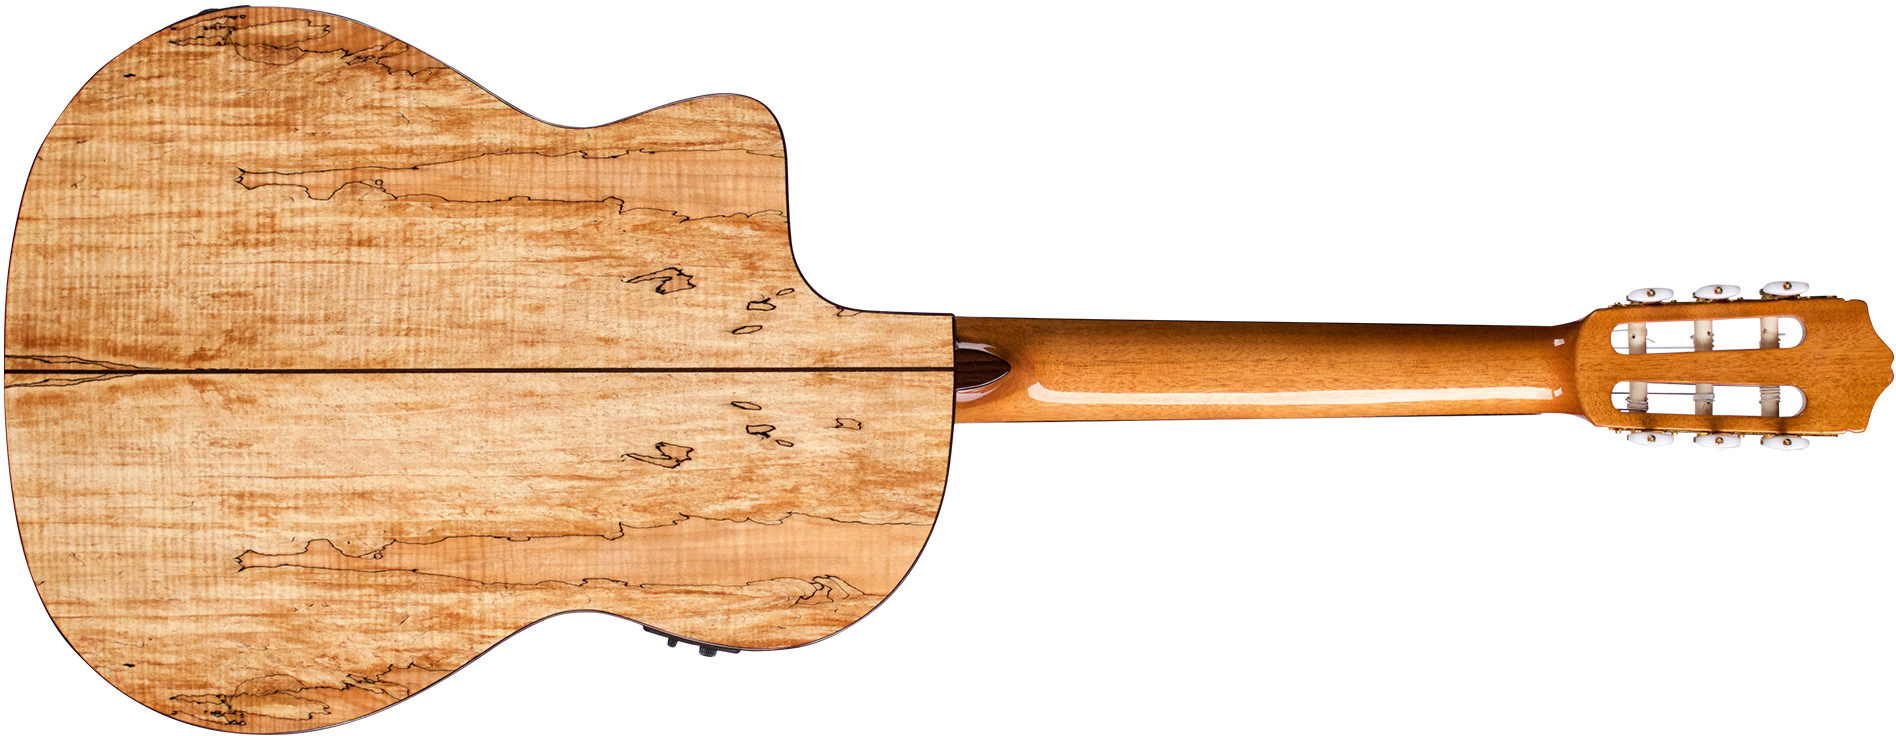 Cordoba C5 Cet Spalted Maple Limited Thinbody Cw Epicea Erable Pf - Natural - Classical guitar 4/4 size - Variation 1